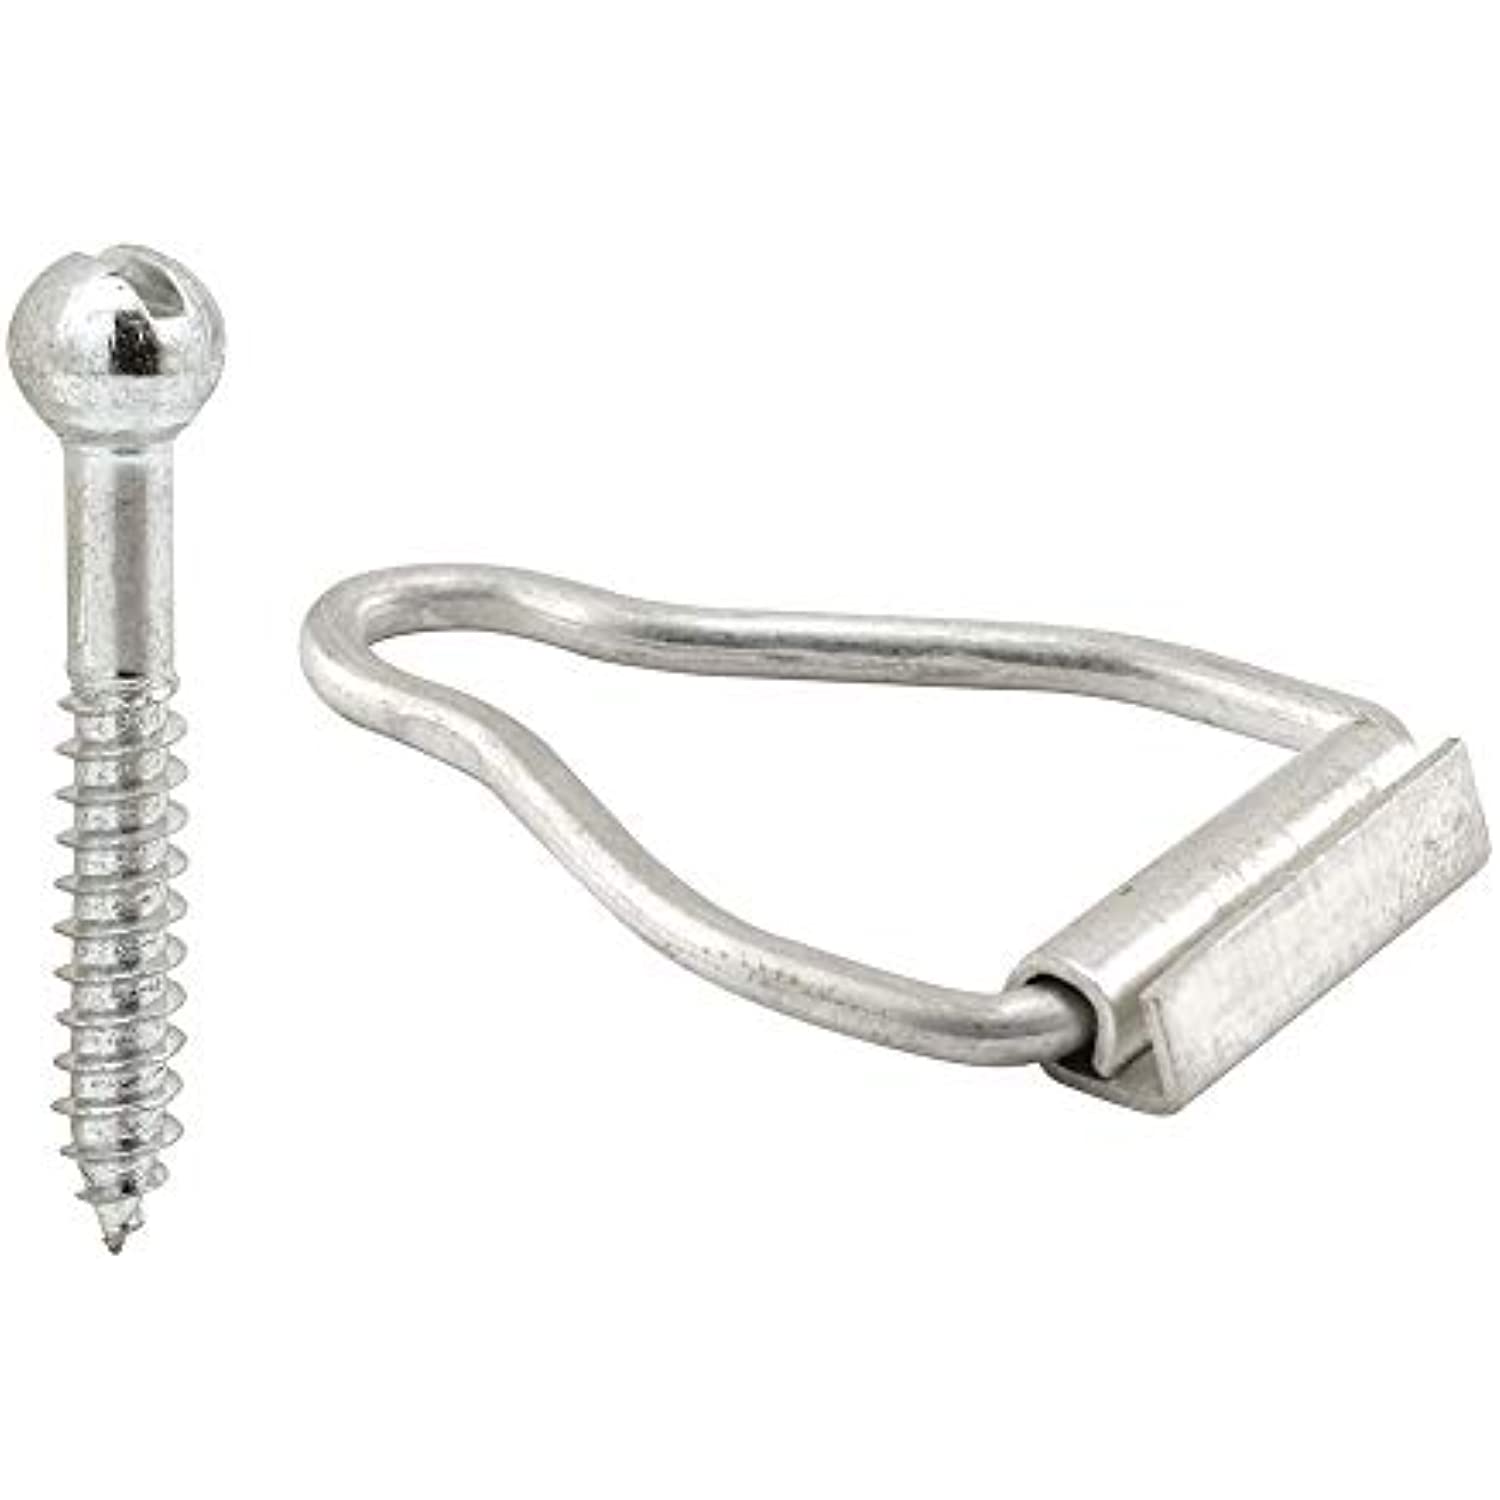 Prime-Line PL 7768 Spline Channel Bail Latch with Screws (Pack of 4), Mill